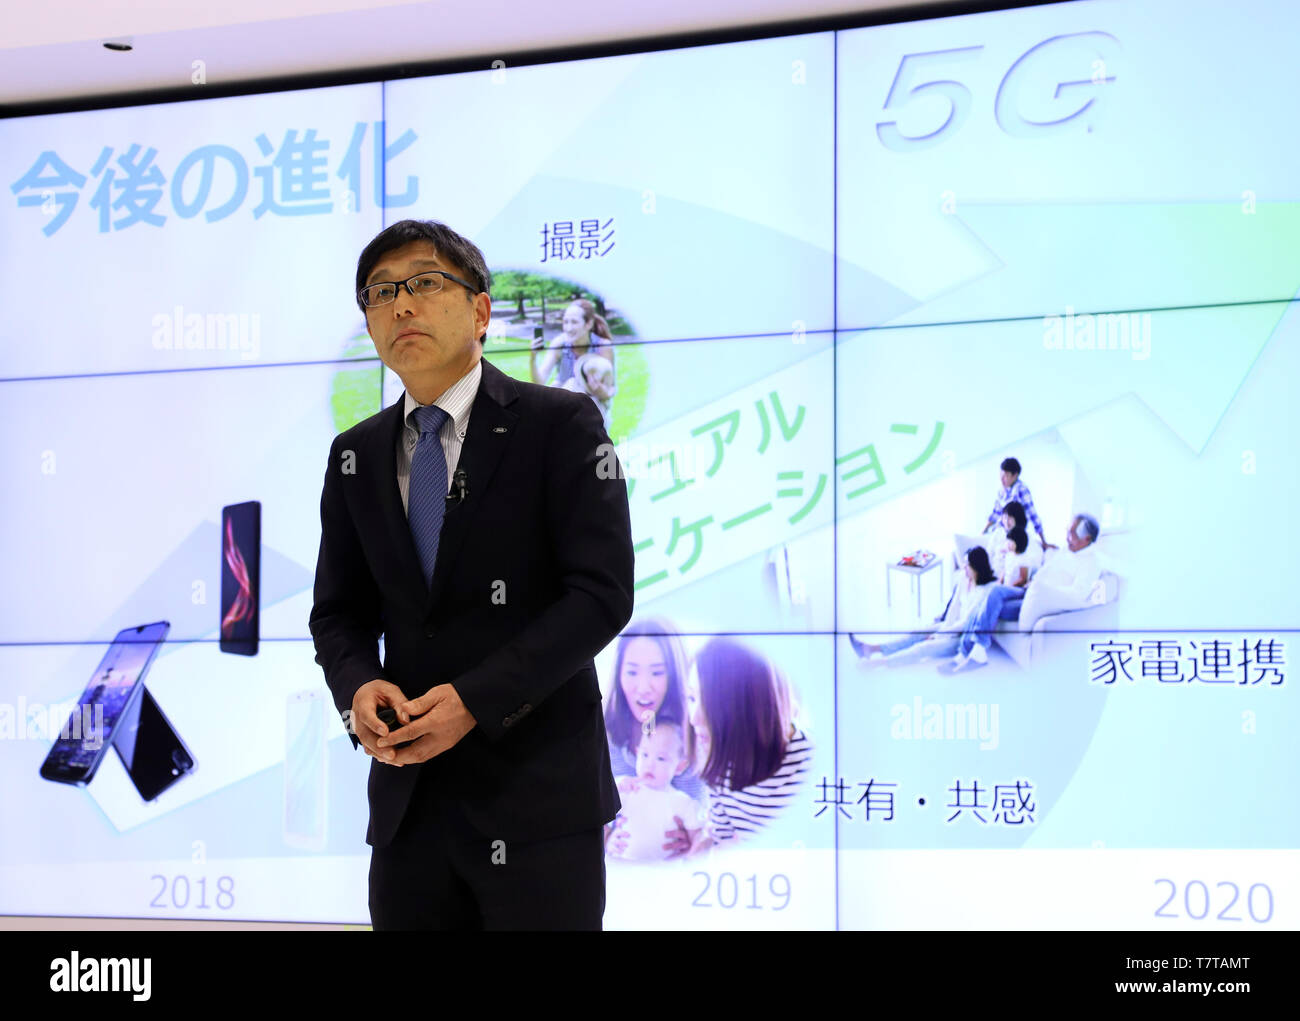 Tokyo, Japan. 8th May, 2019. Japanese electronics giant Sharp mobile communication business unit president Yoshiro Nakano announces a road map of the company's 5G smart phone which will go on sale next year at the company's Tokyo office on Wednesday, May 8, 2019. The new AQUOS smart phone has newly developed 6.2-inch sized IGZO LCD on its display which can reproduce 1 billion color images. Credit: Yoshio Tsunoda/AFLO/Alamy Live News Stock Photo